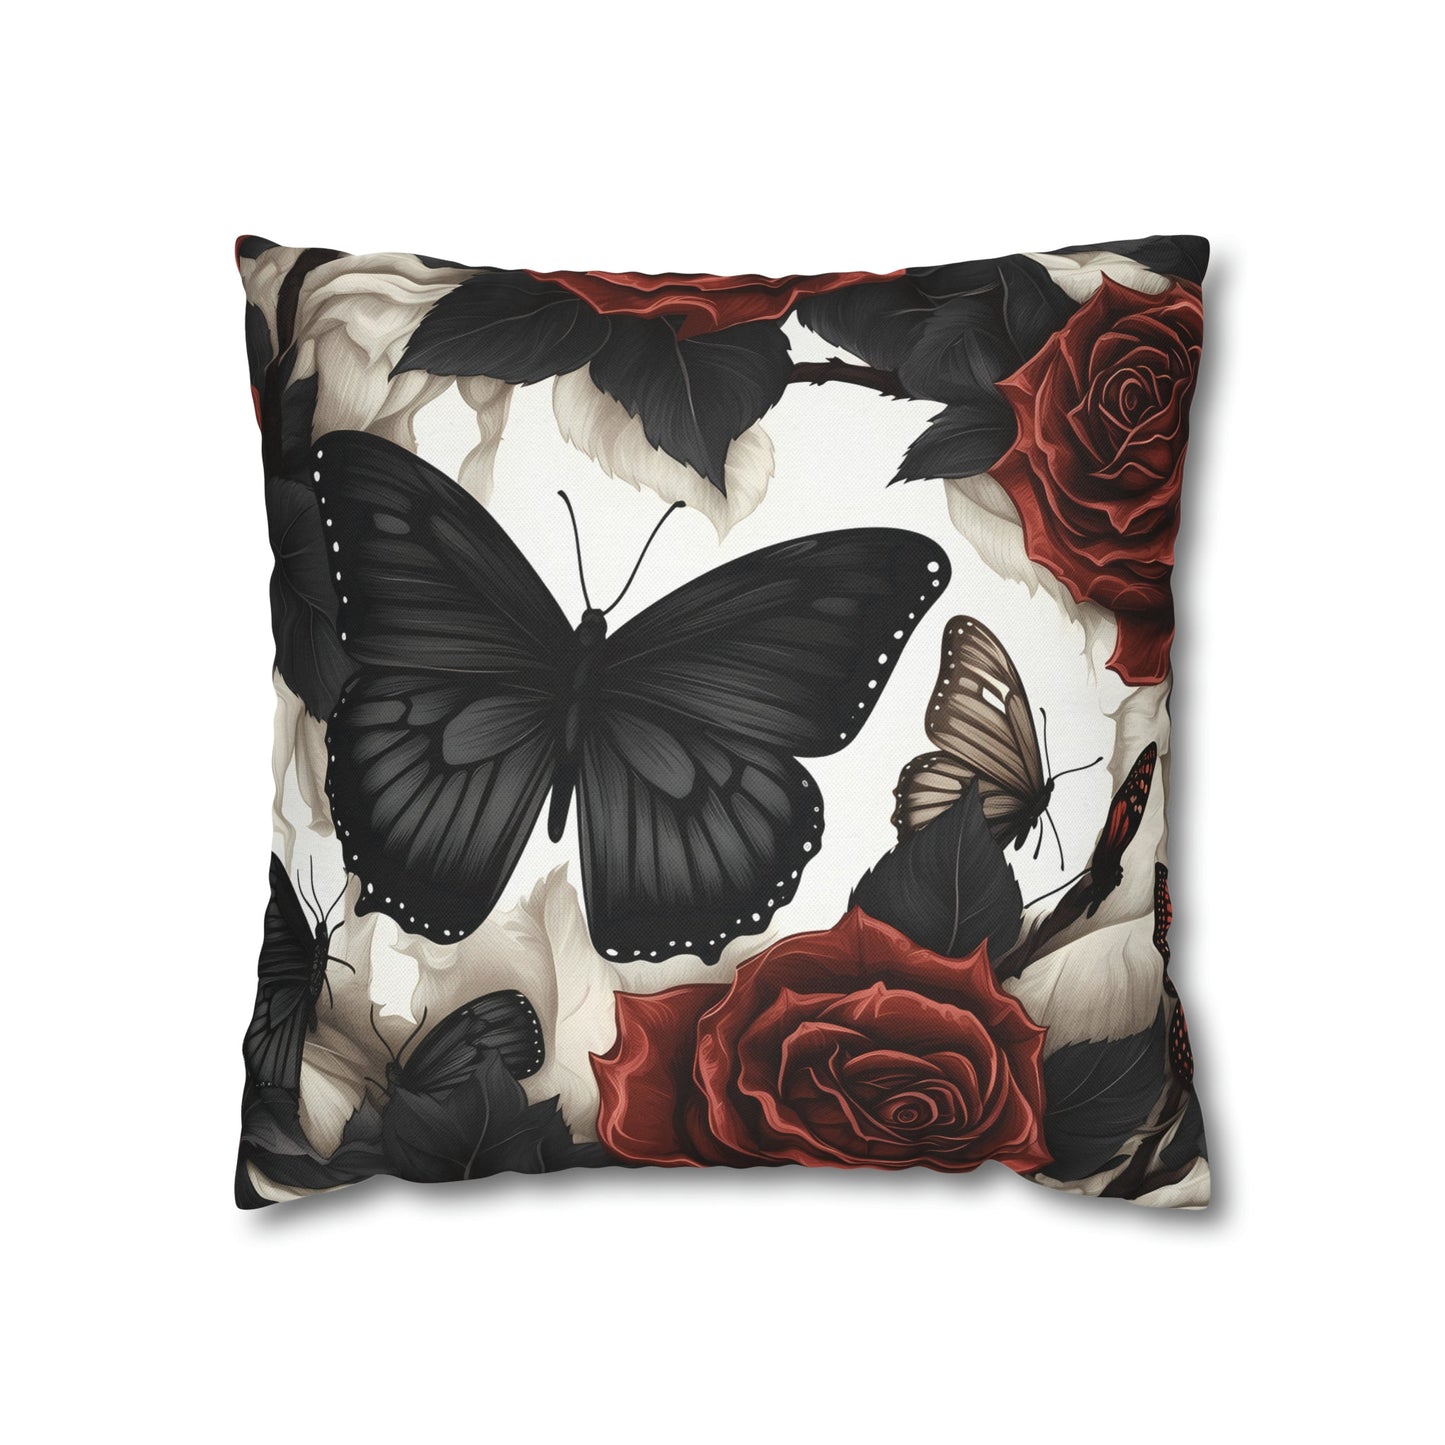 Red Roses and Black Butterflies Square Pillow CaseHome DecorVTZdesigns18" × 18"All Over PrintAOPBed